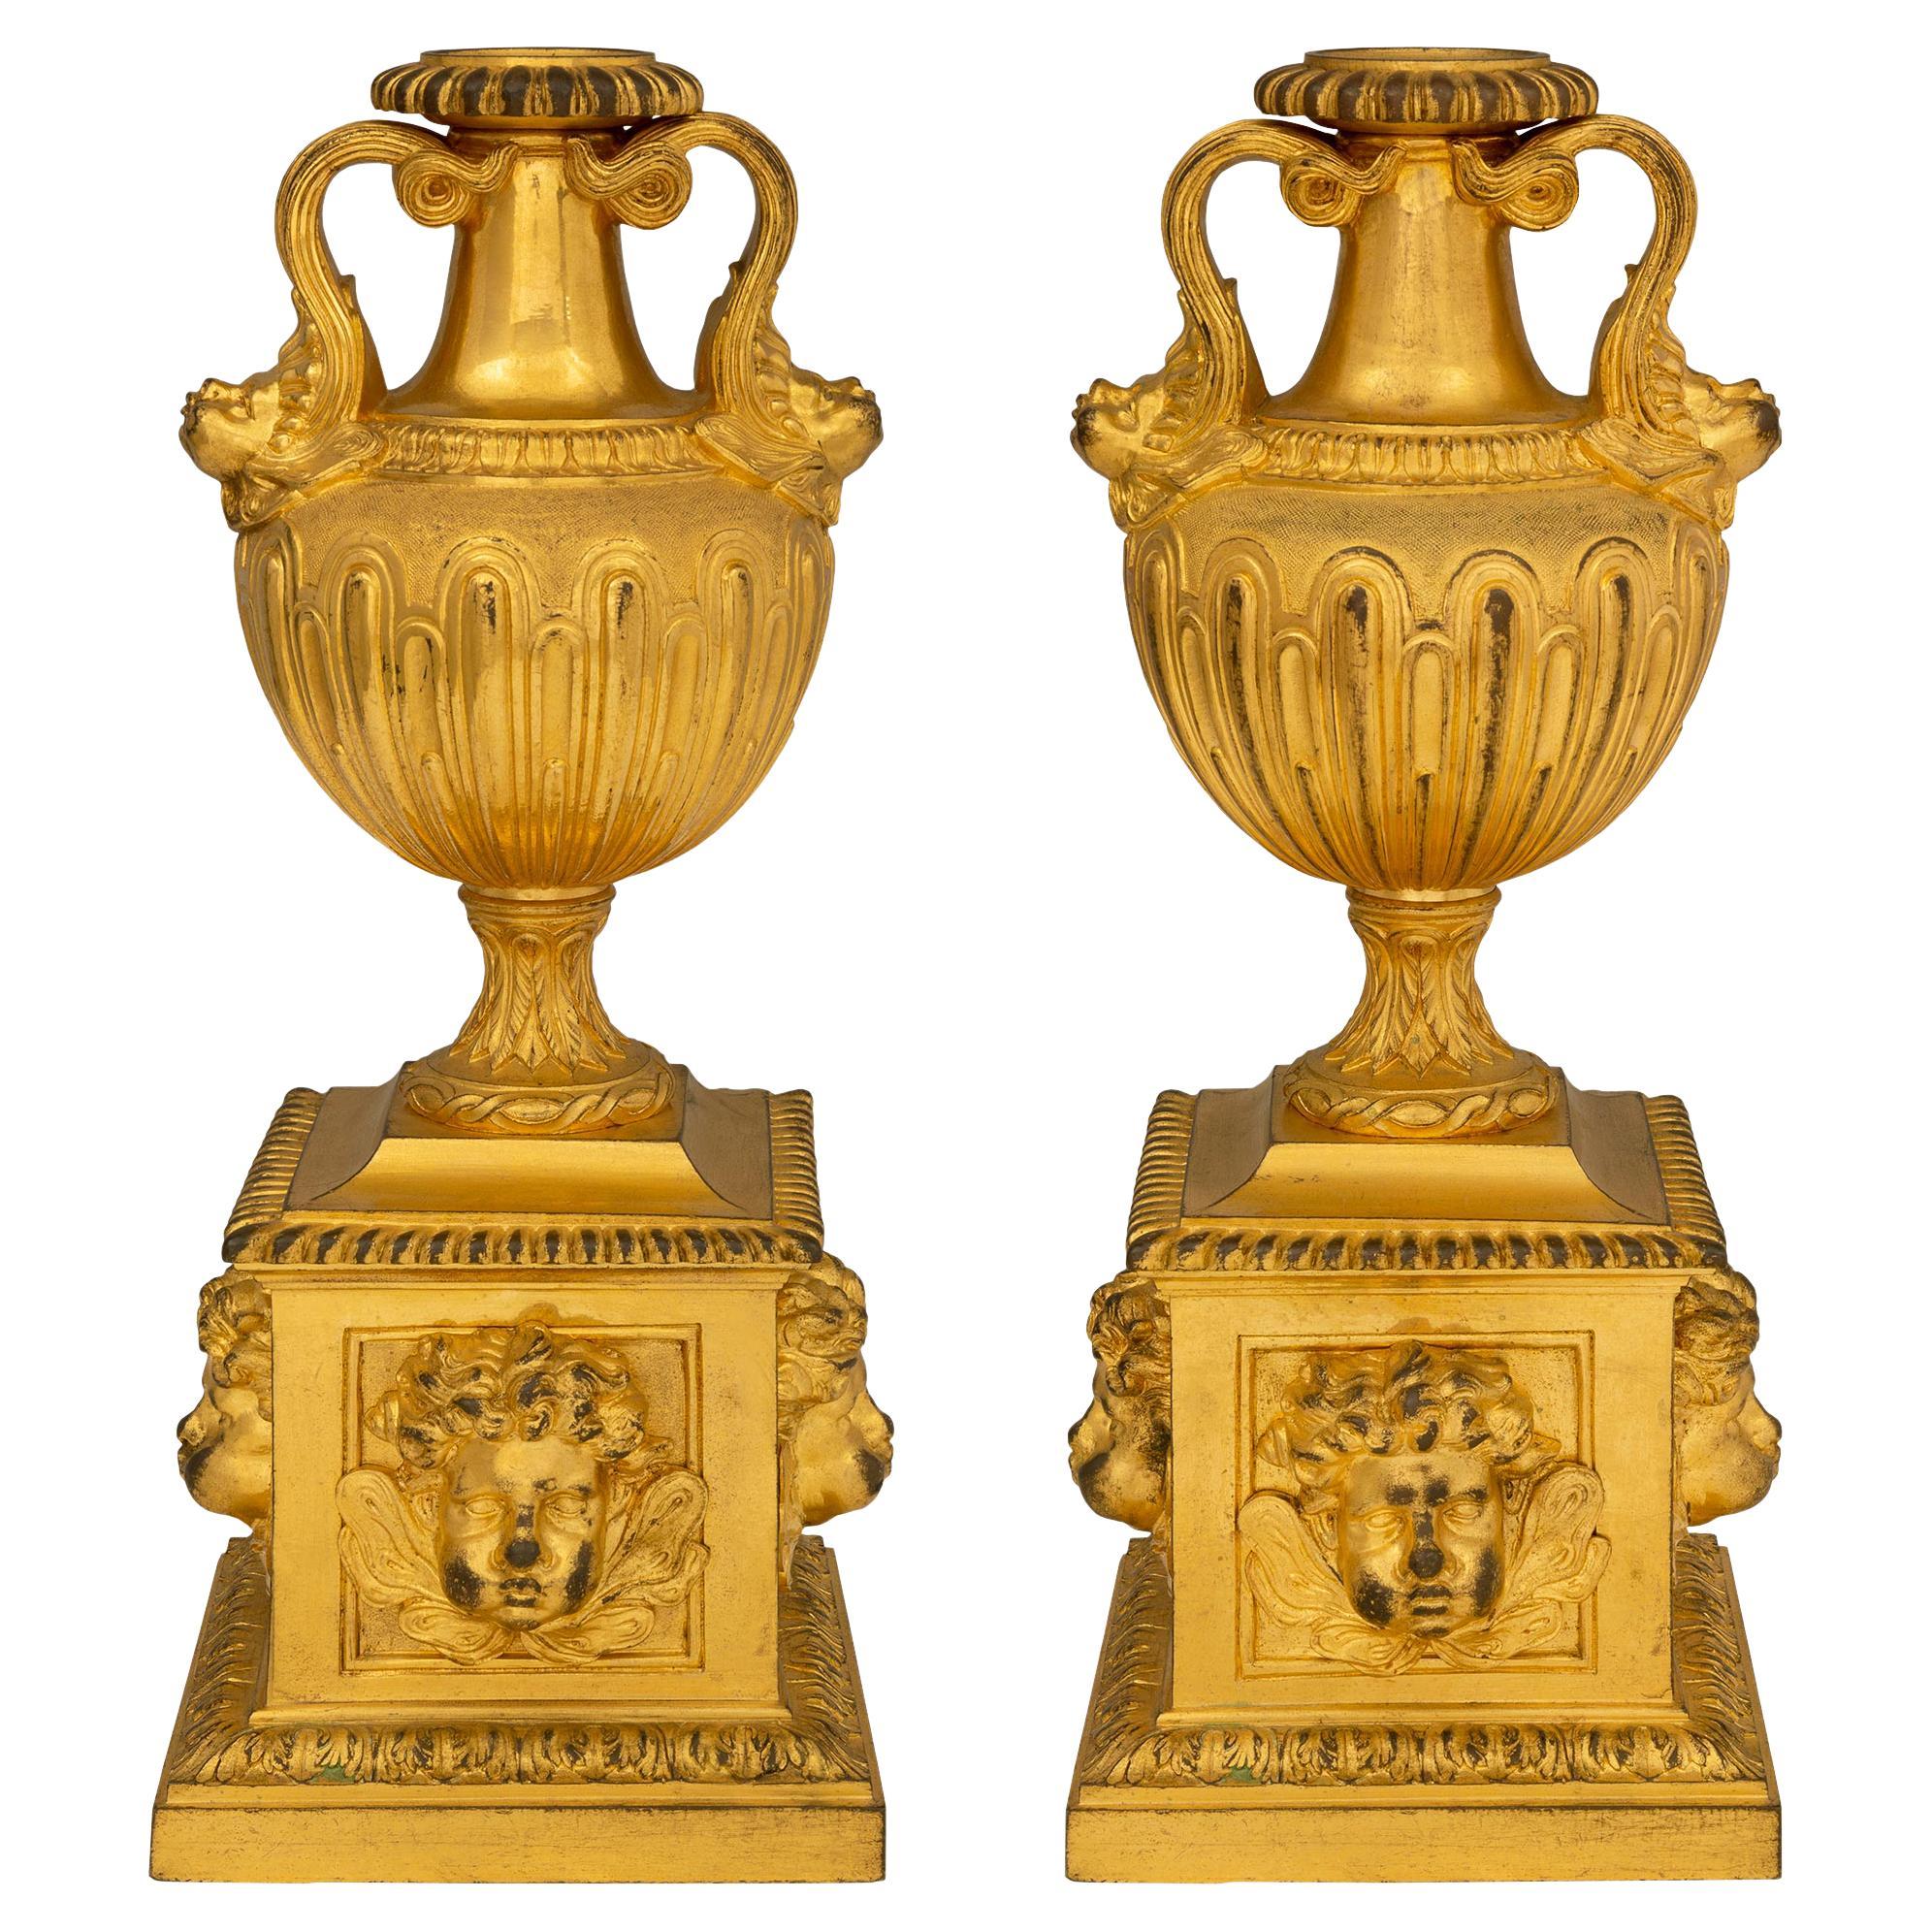 Pair of French 18th Century Louis XVI Period Ormolu Fireplace Chenets/Andirons For Sale